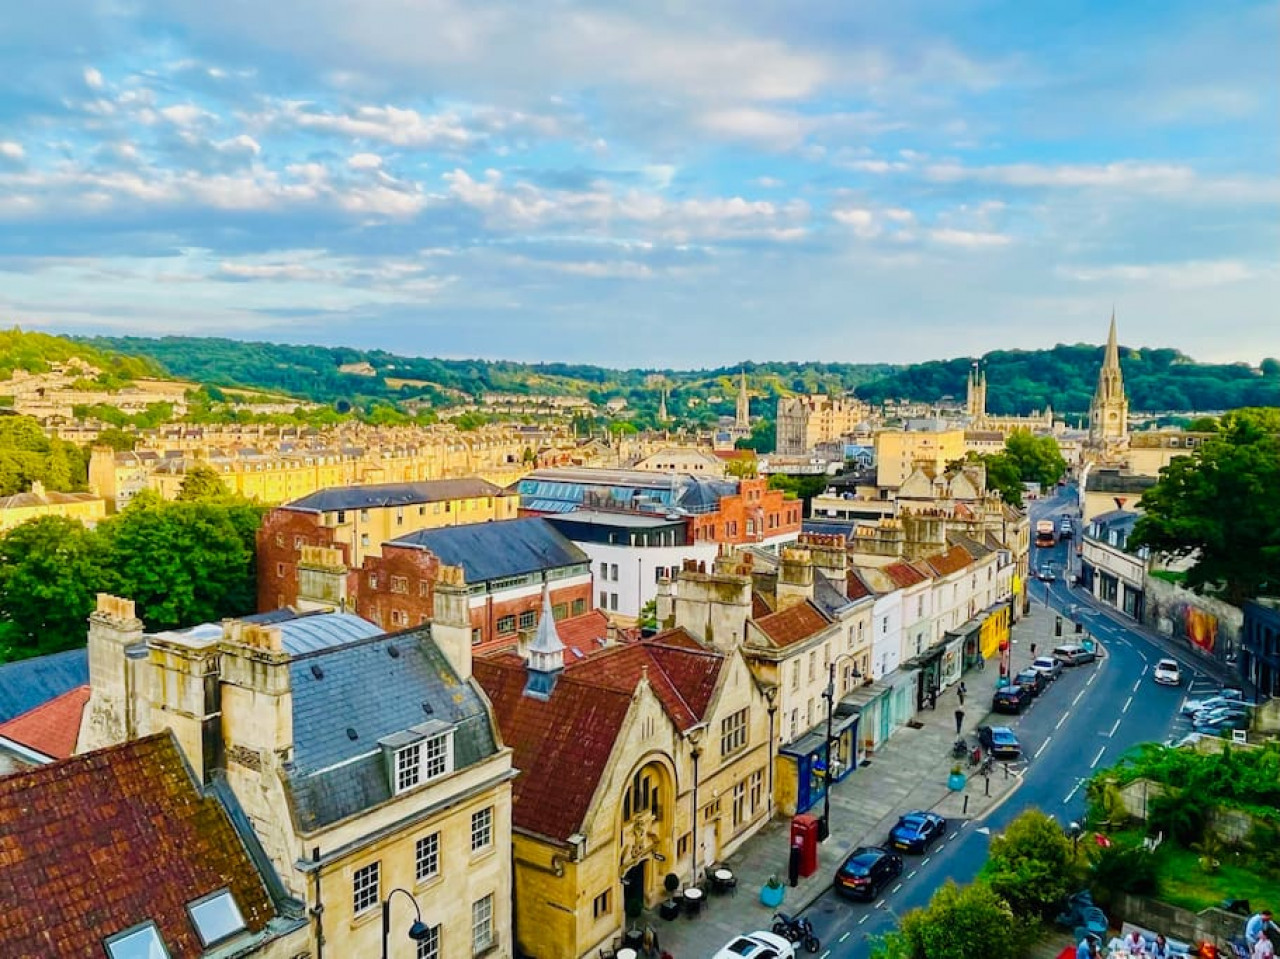 The Paragon Penthouse - Stunning Views over Bath!